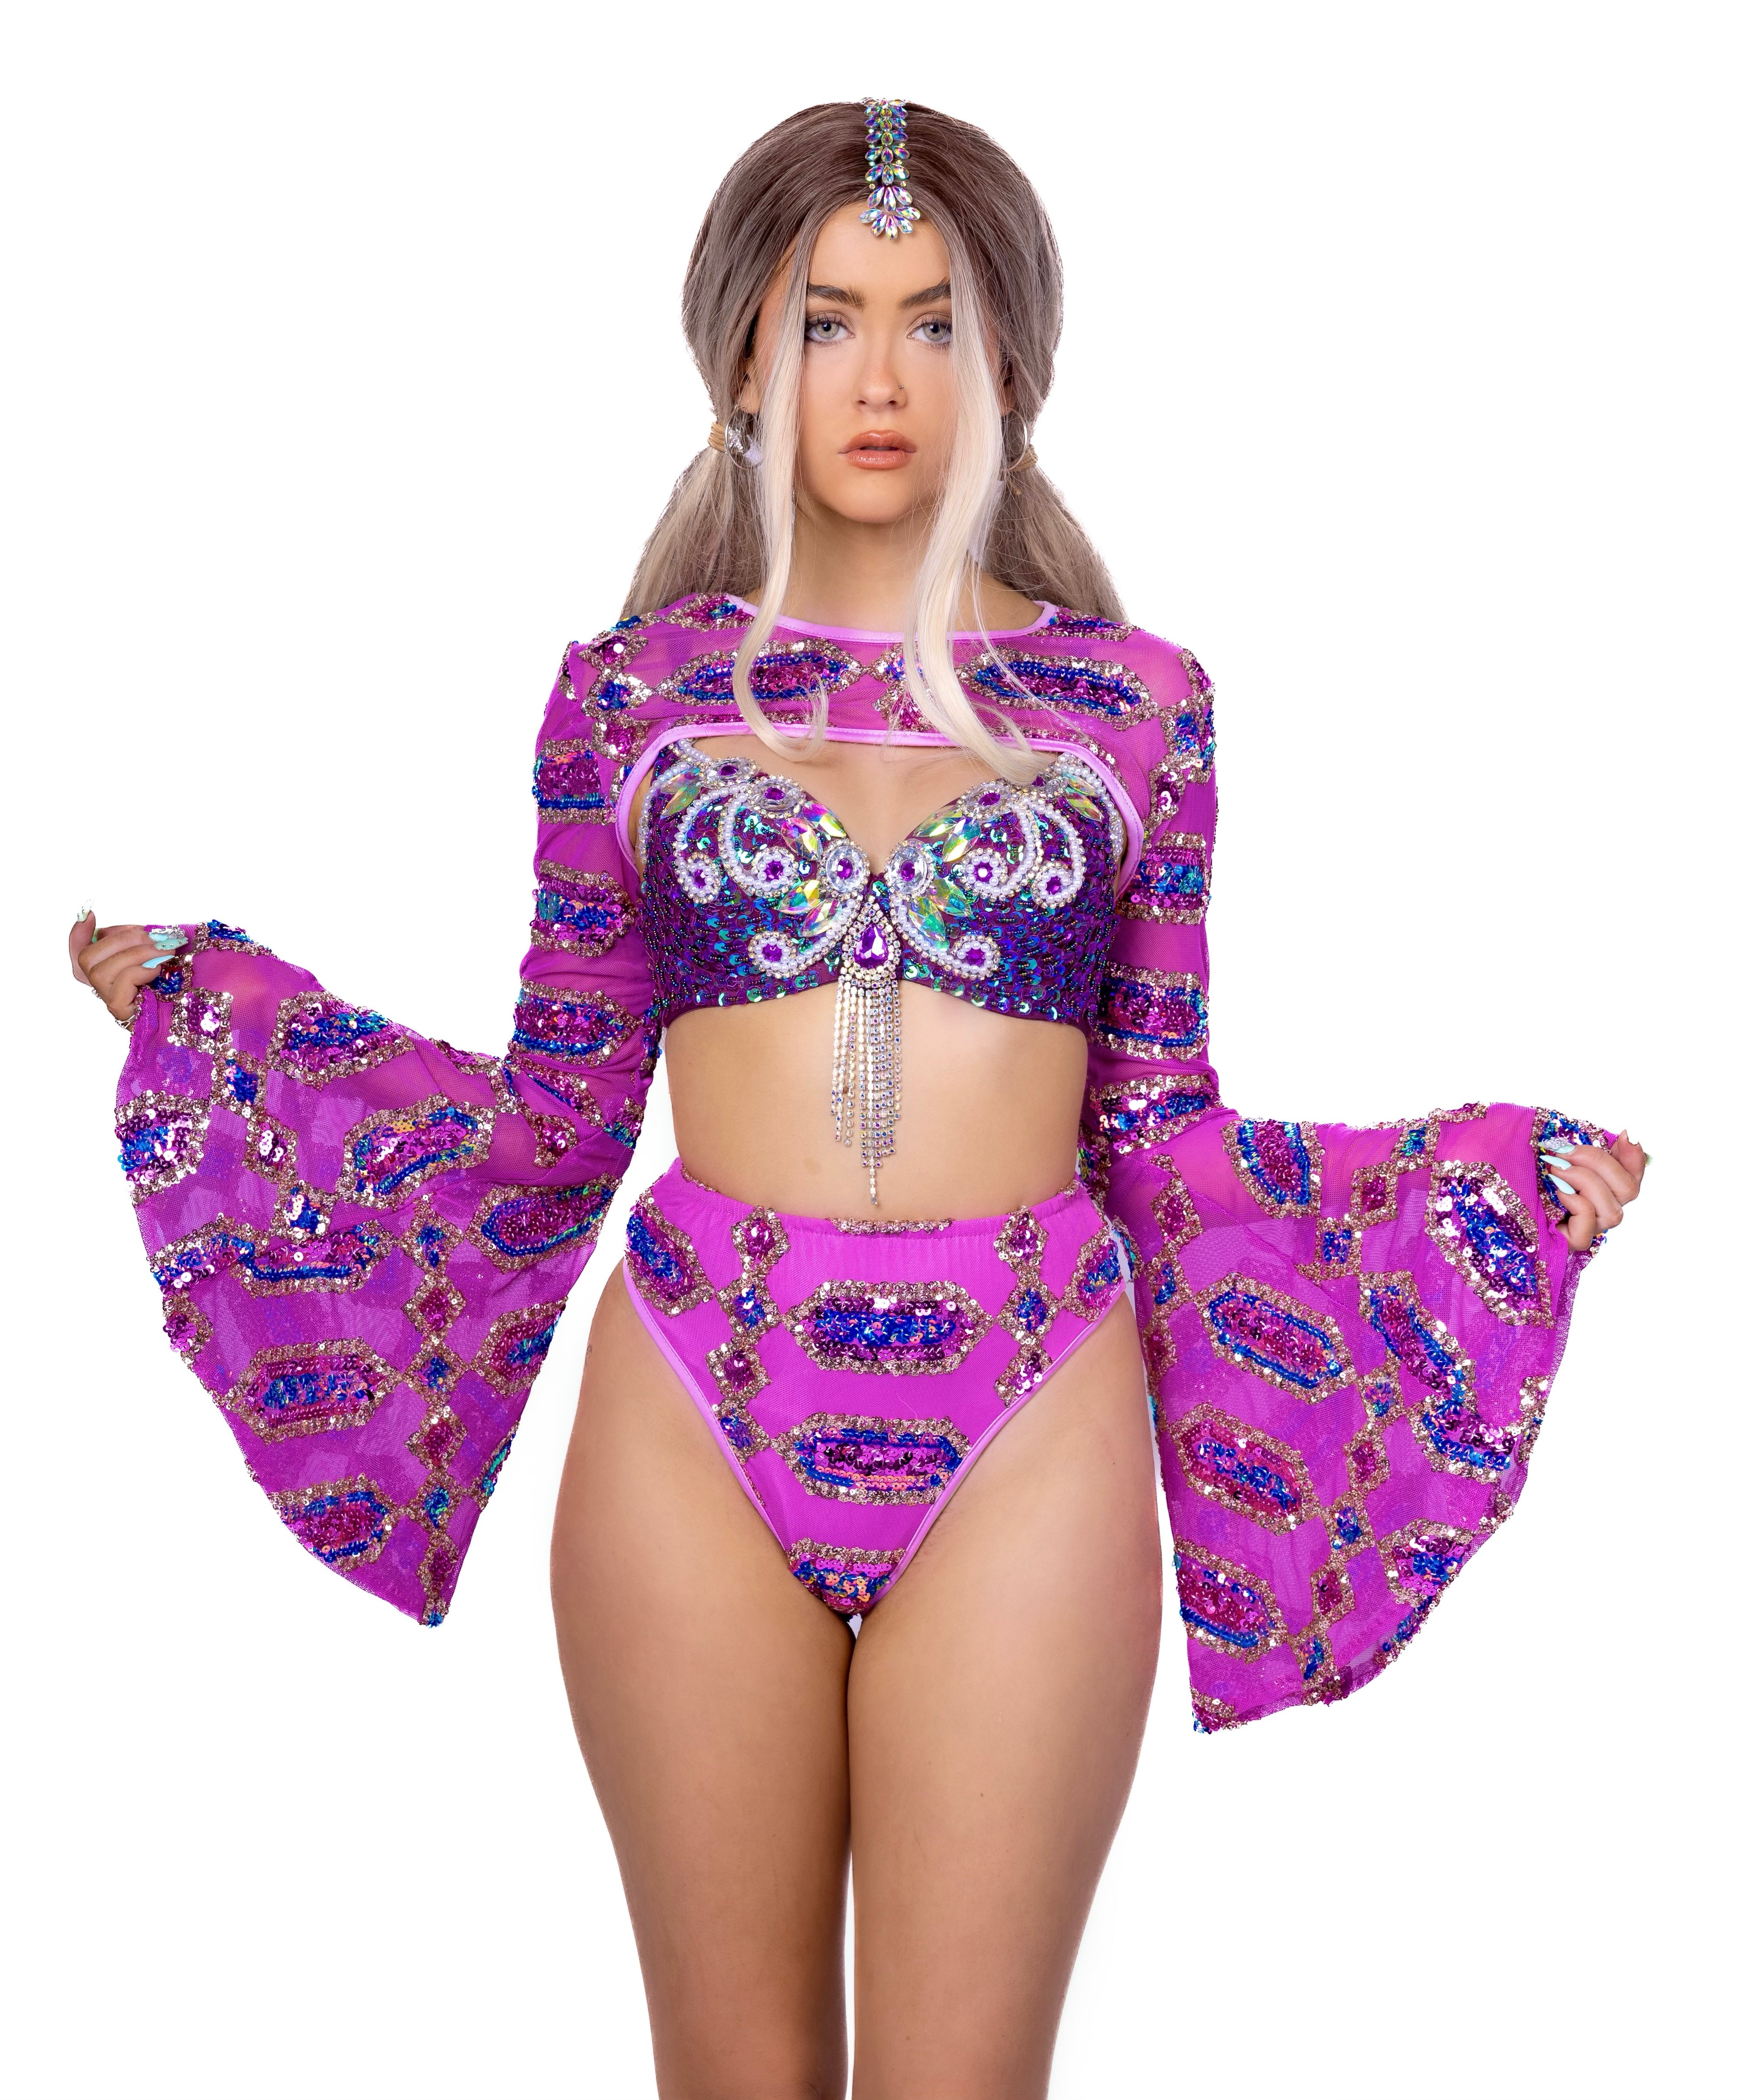 FULL OUTFIT- Lavender Fantasy